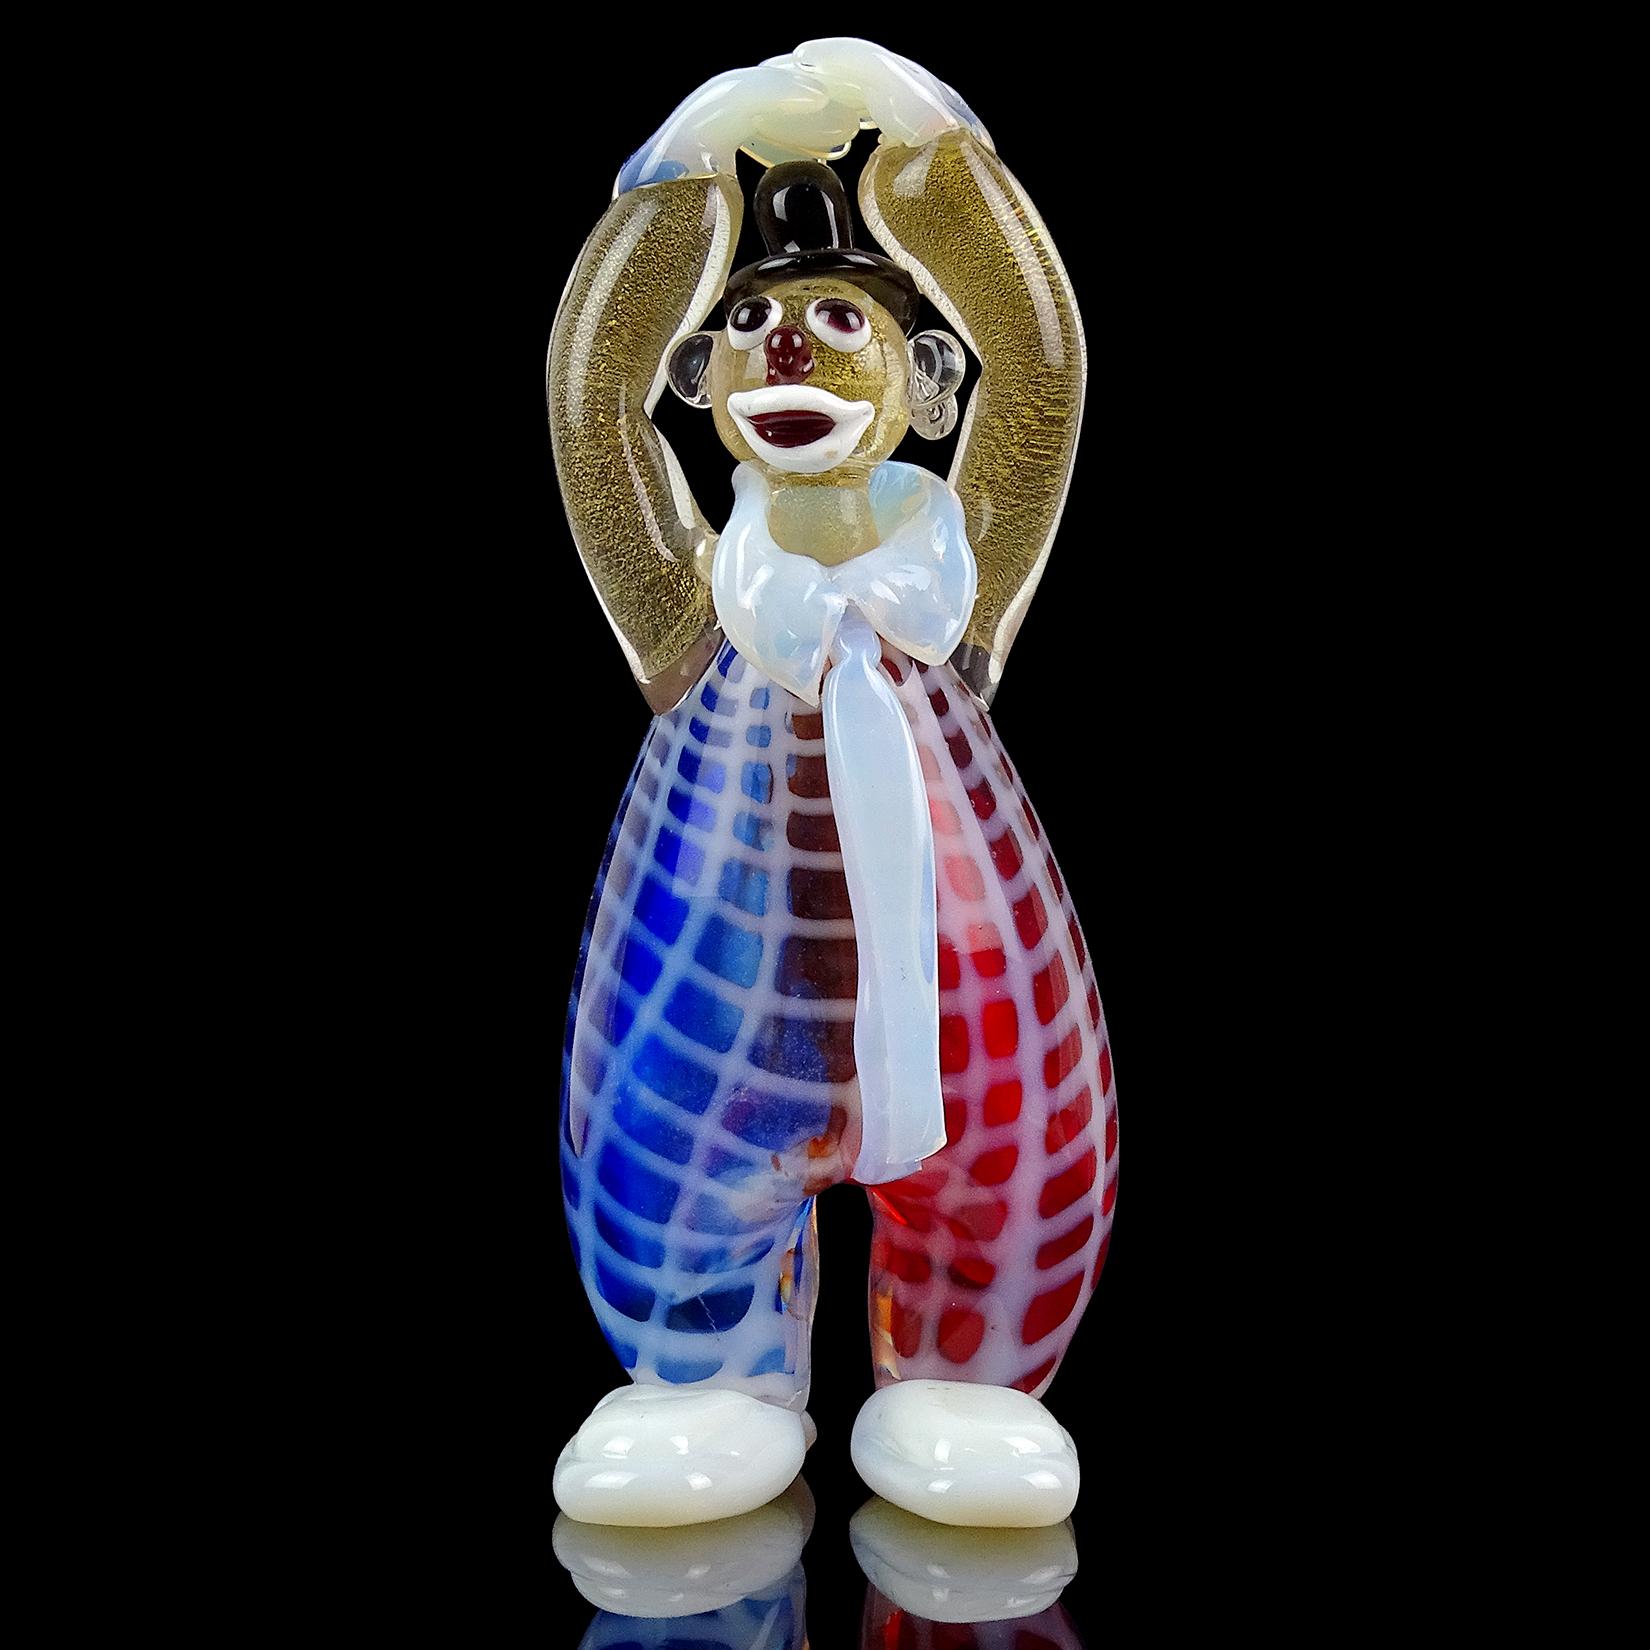 Beautiful vintage Murano hand blown opalescent white, red and blue jumpsuit Italian art glass clown sculpture / figure. He has a very cute painted face and red nose. The clown also has gold flecks throughout the arms and face. He is wearing a black